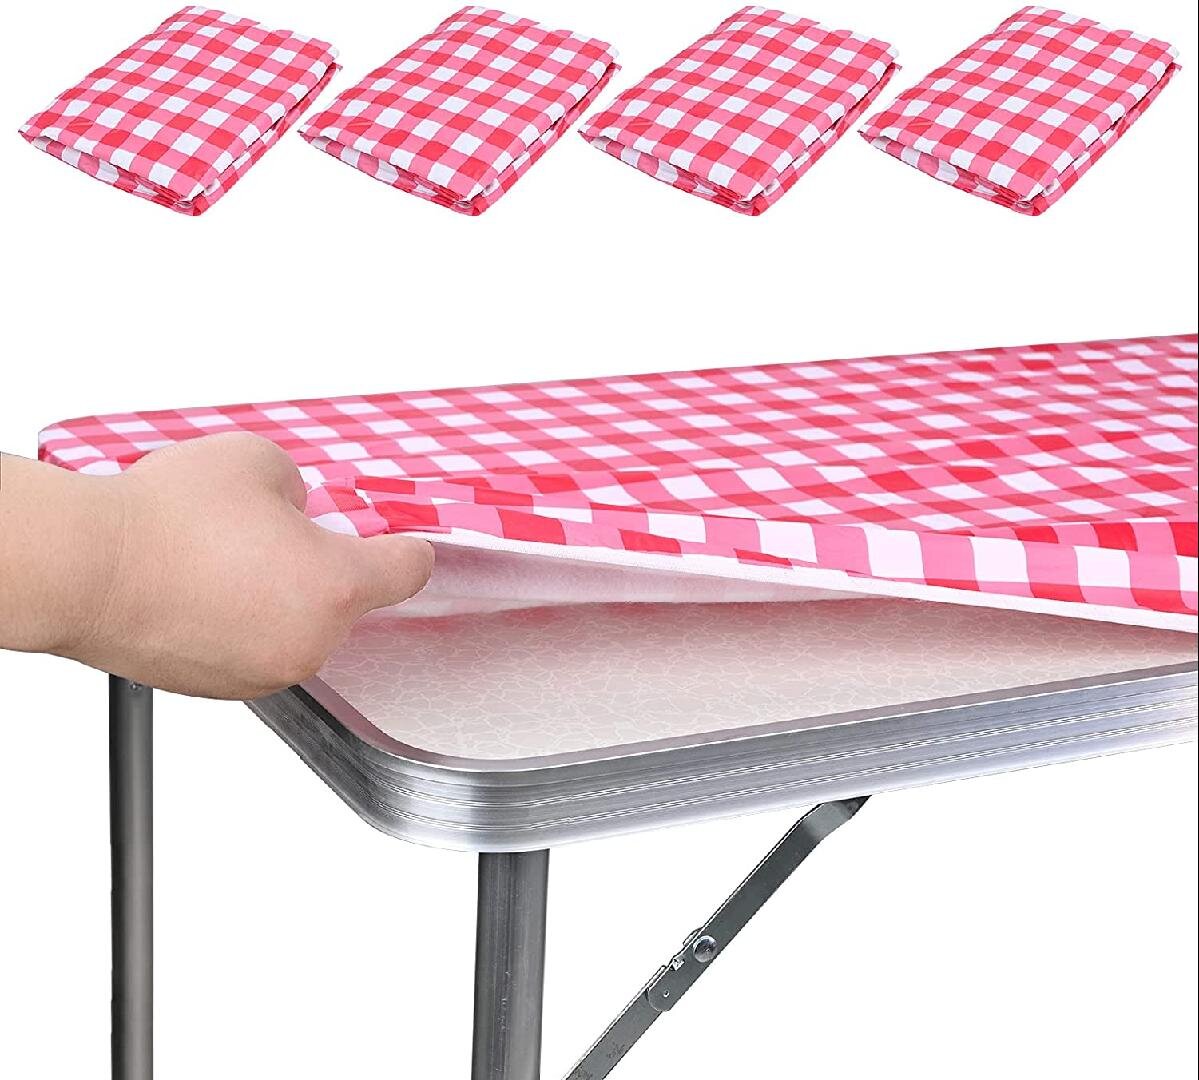 Checkered, 30 x 72 Inch Rectangle Tight Fit Vinyl Elastic Tablecloth for Folding Table 6ft Rectangle Elastic Fitted Tablecloth Waterproof Oil-Proof PVC Table Cloth Stain-Resistant Wipeable